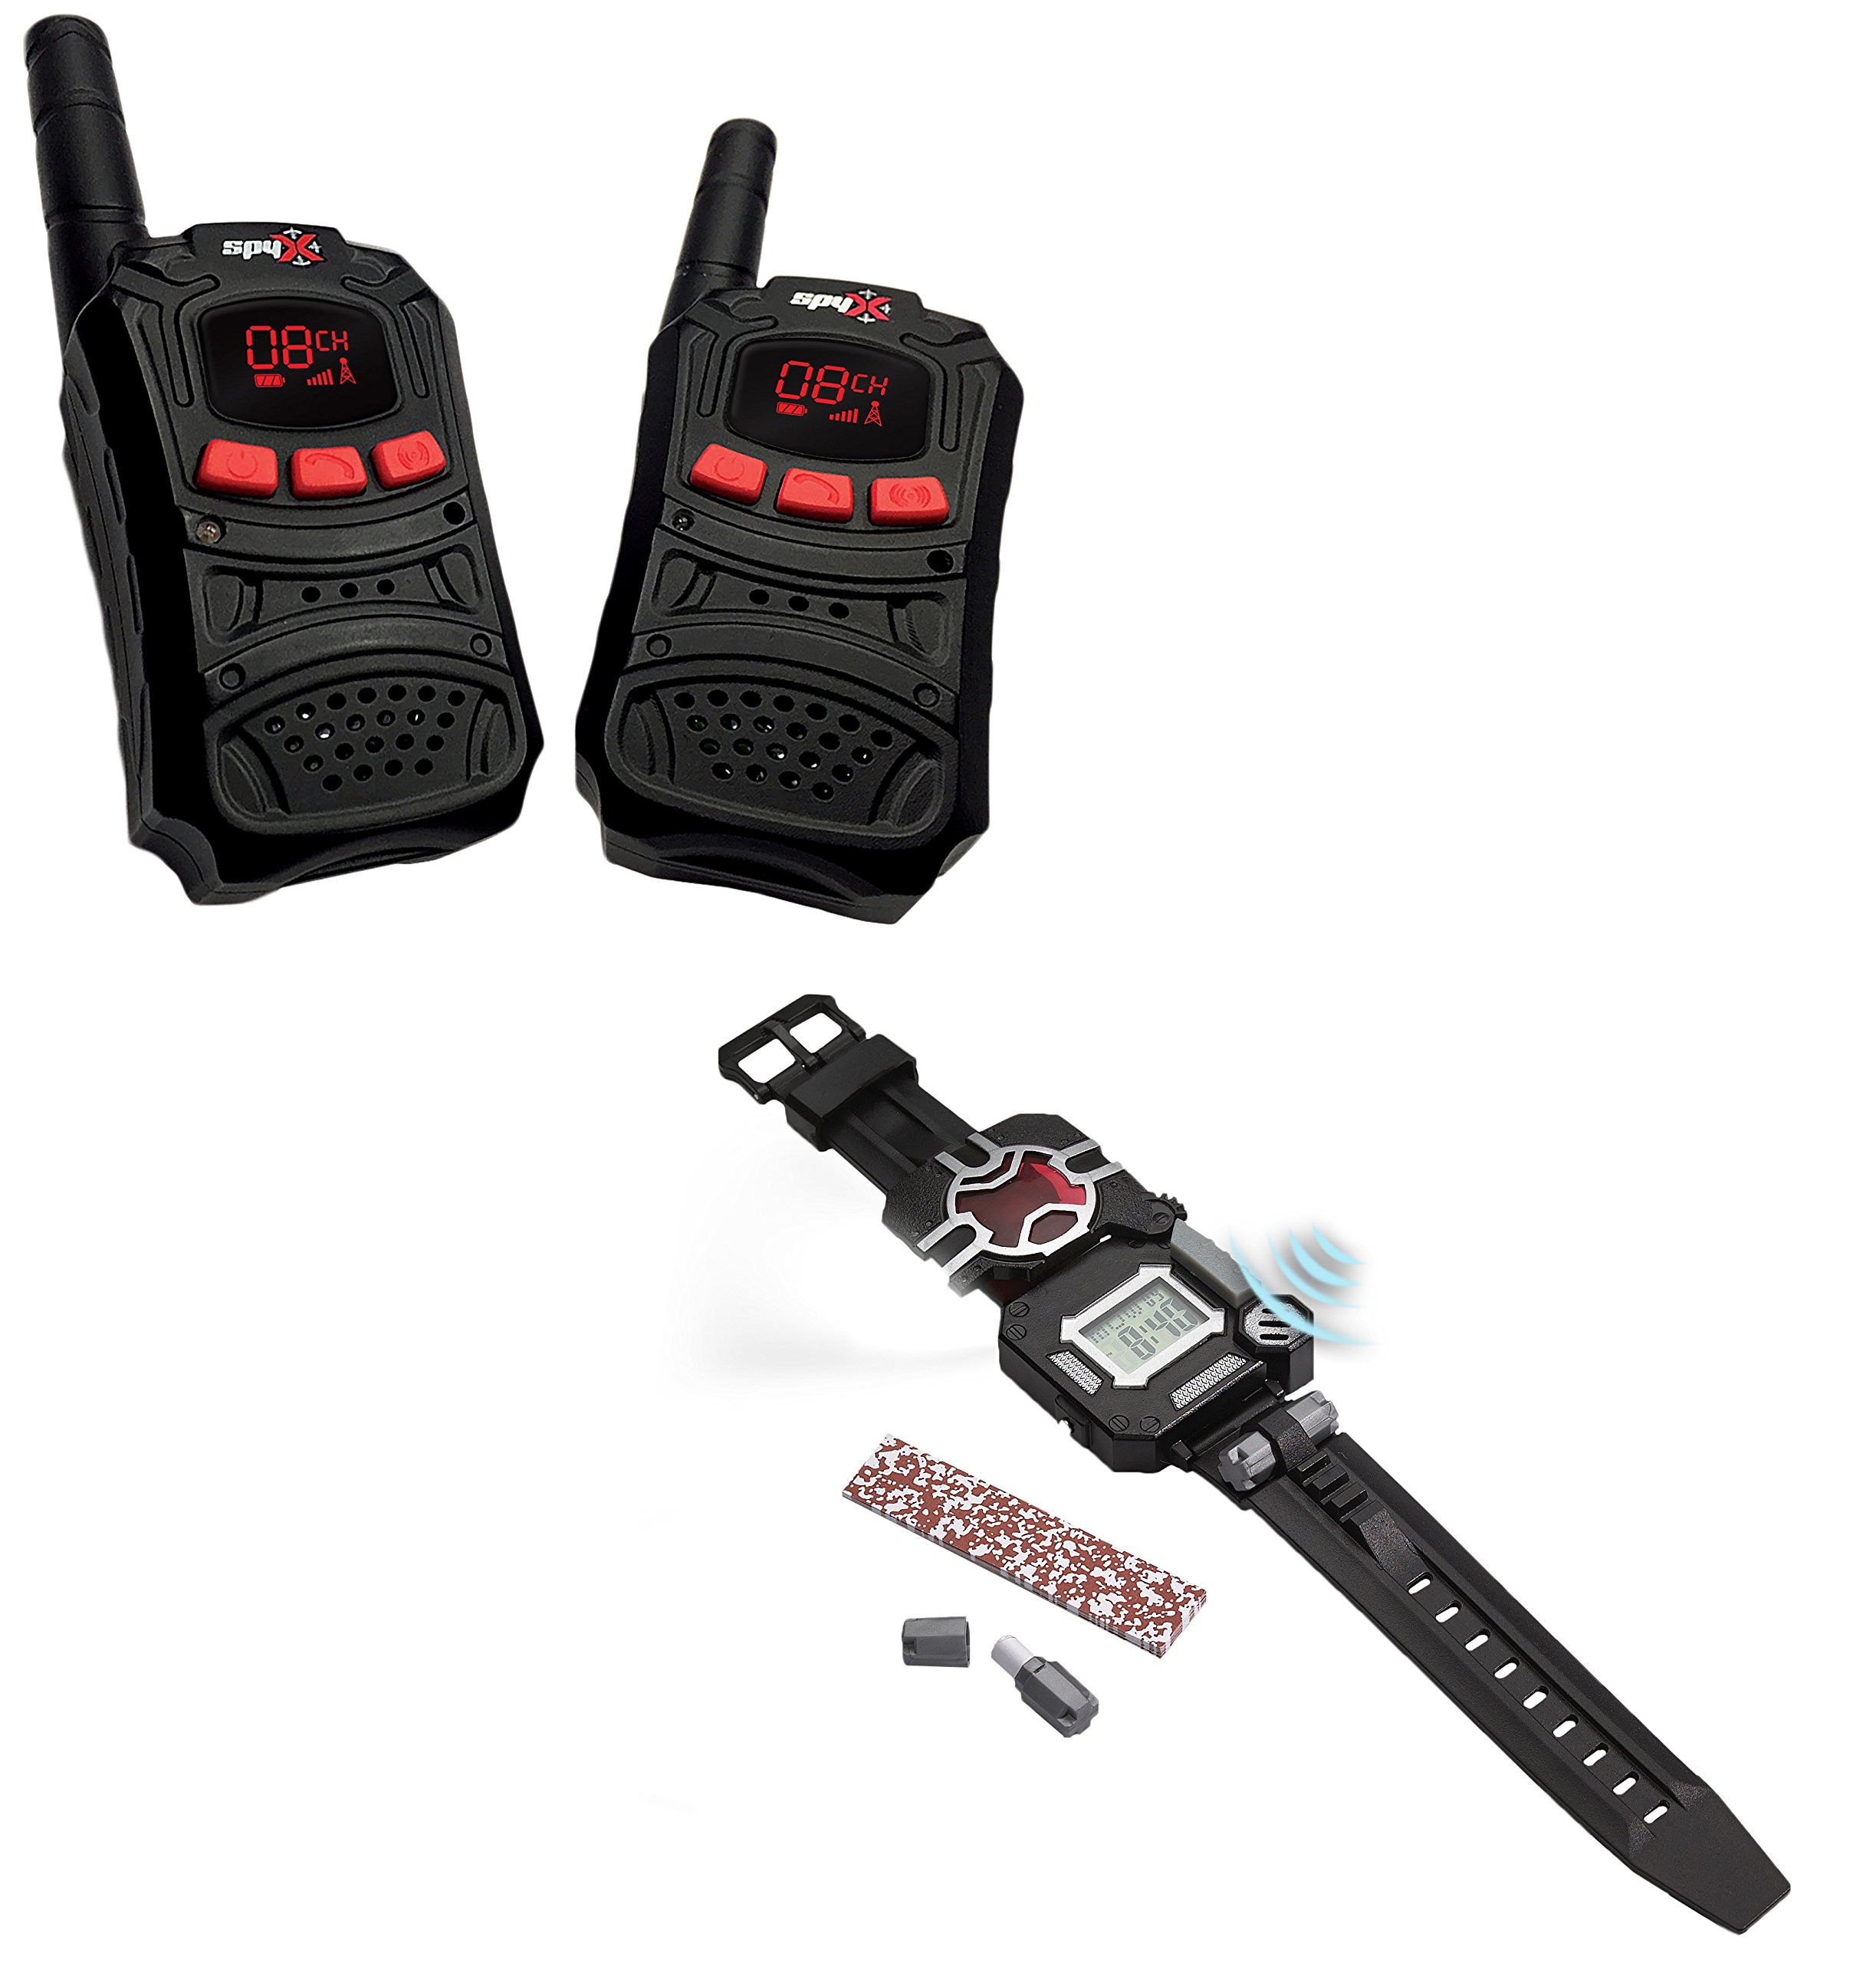 SpyX Walkie Talkies + Recon Watch - Double Agent Tool Set! 2 Pack of Walkie Talkies + an 8-in-1 Watch. Essential Items for Any Spy Gear Collection to Get The Job Done While Spying On The Enemy